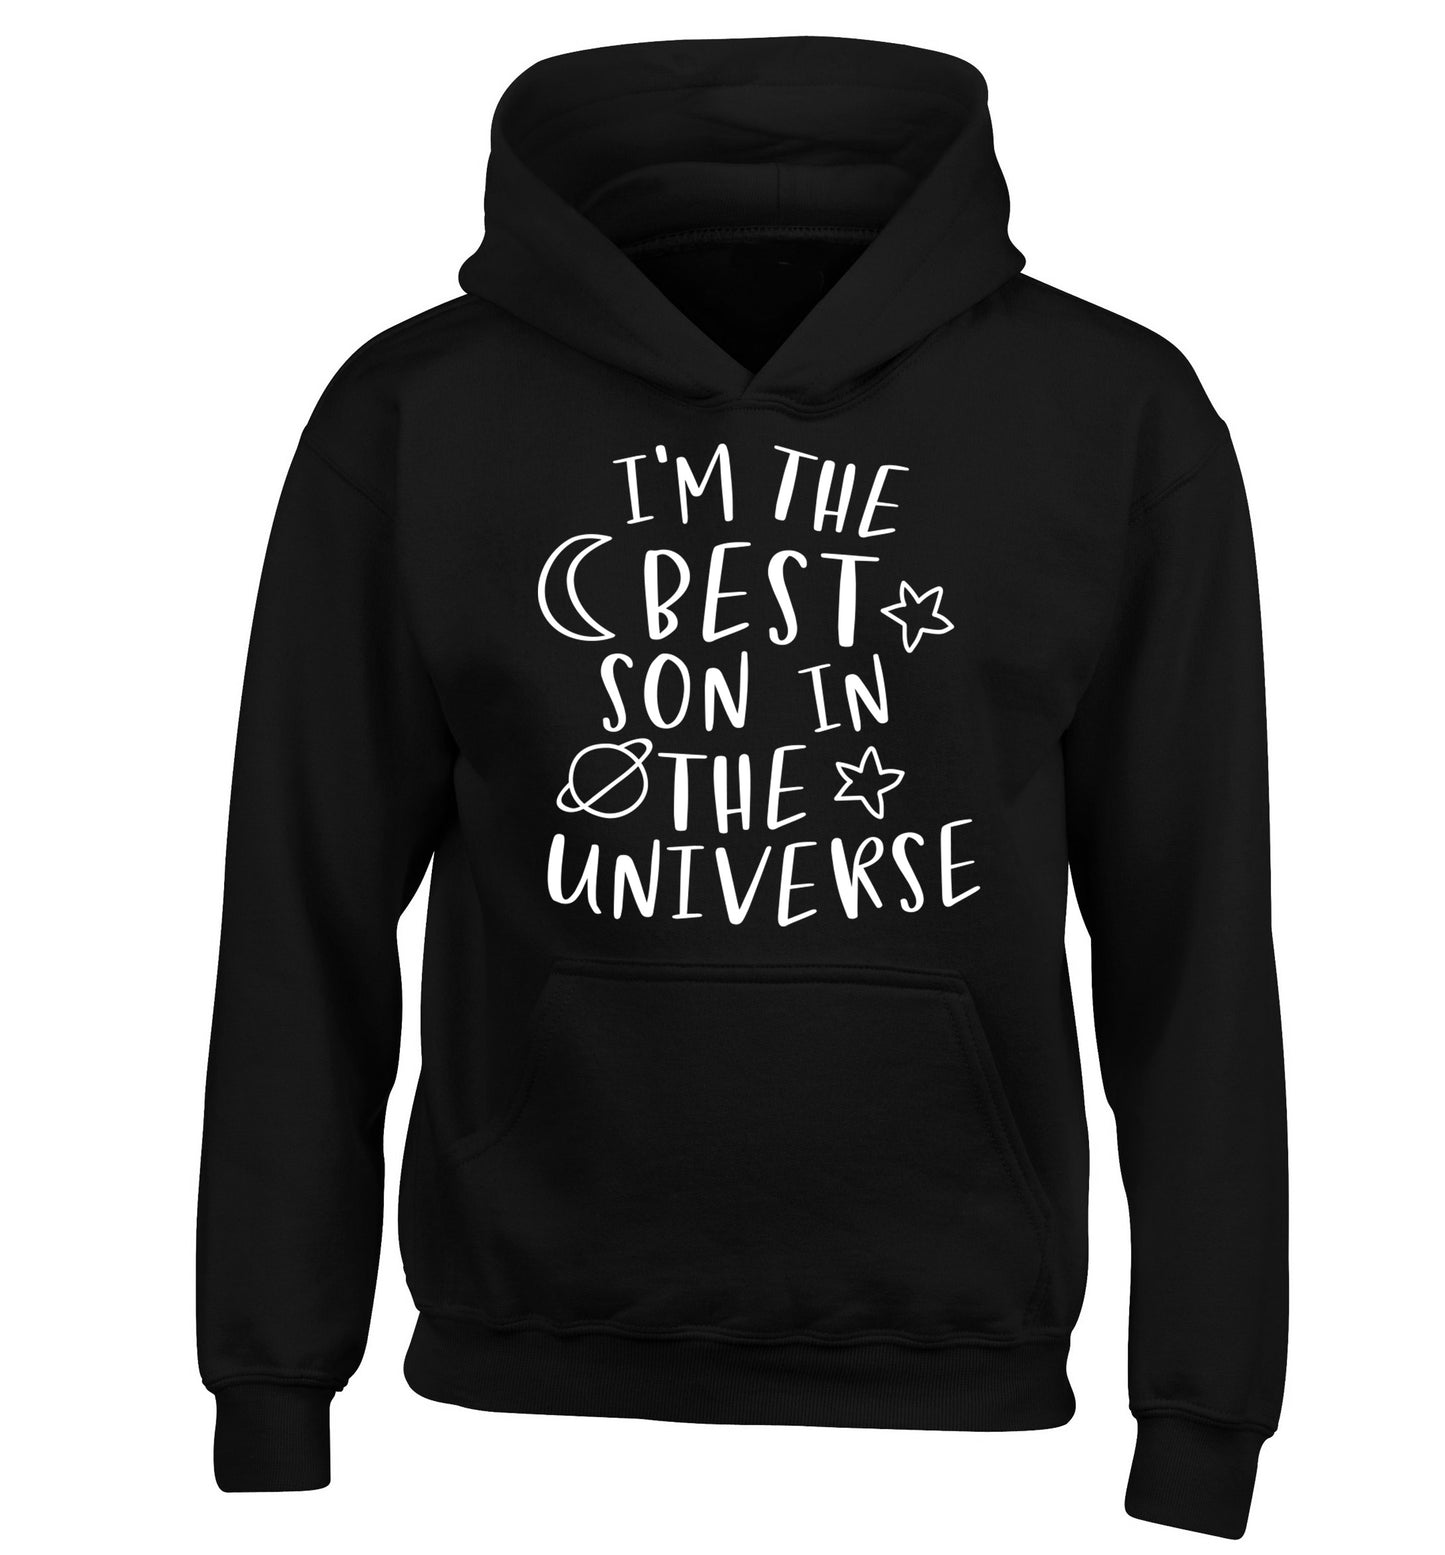 I'm the best son in the universe children's black hoodie 12-13 Years